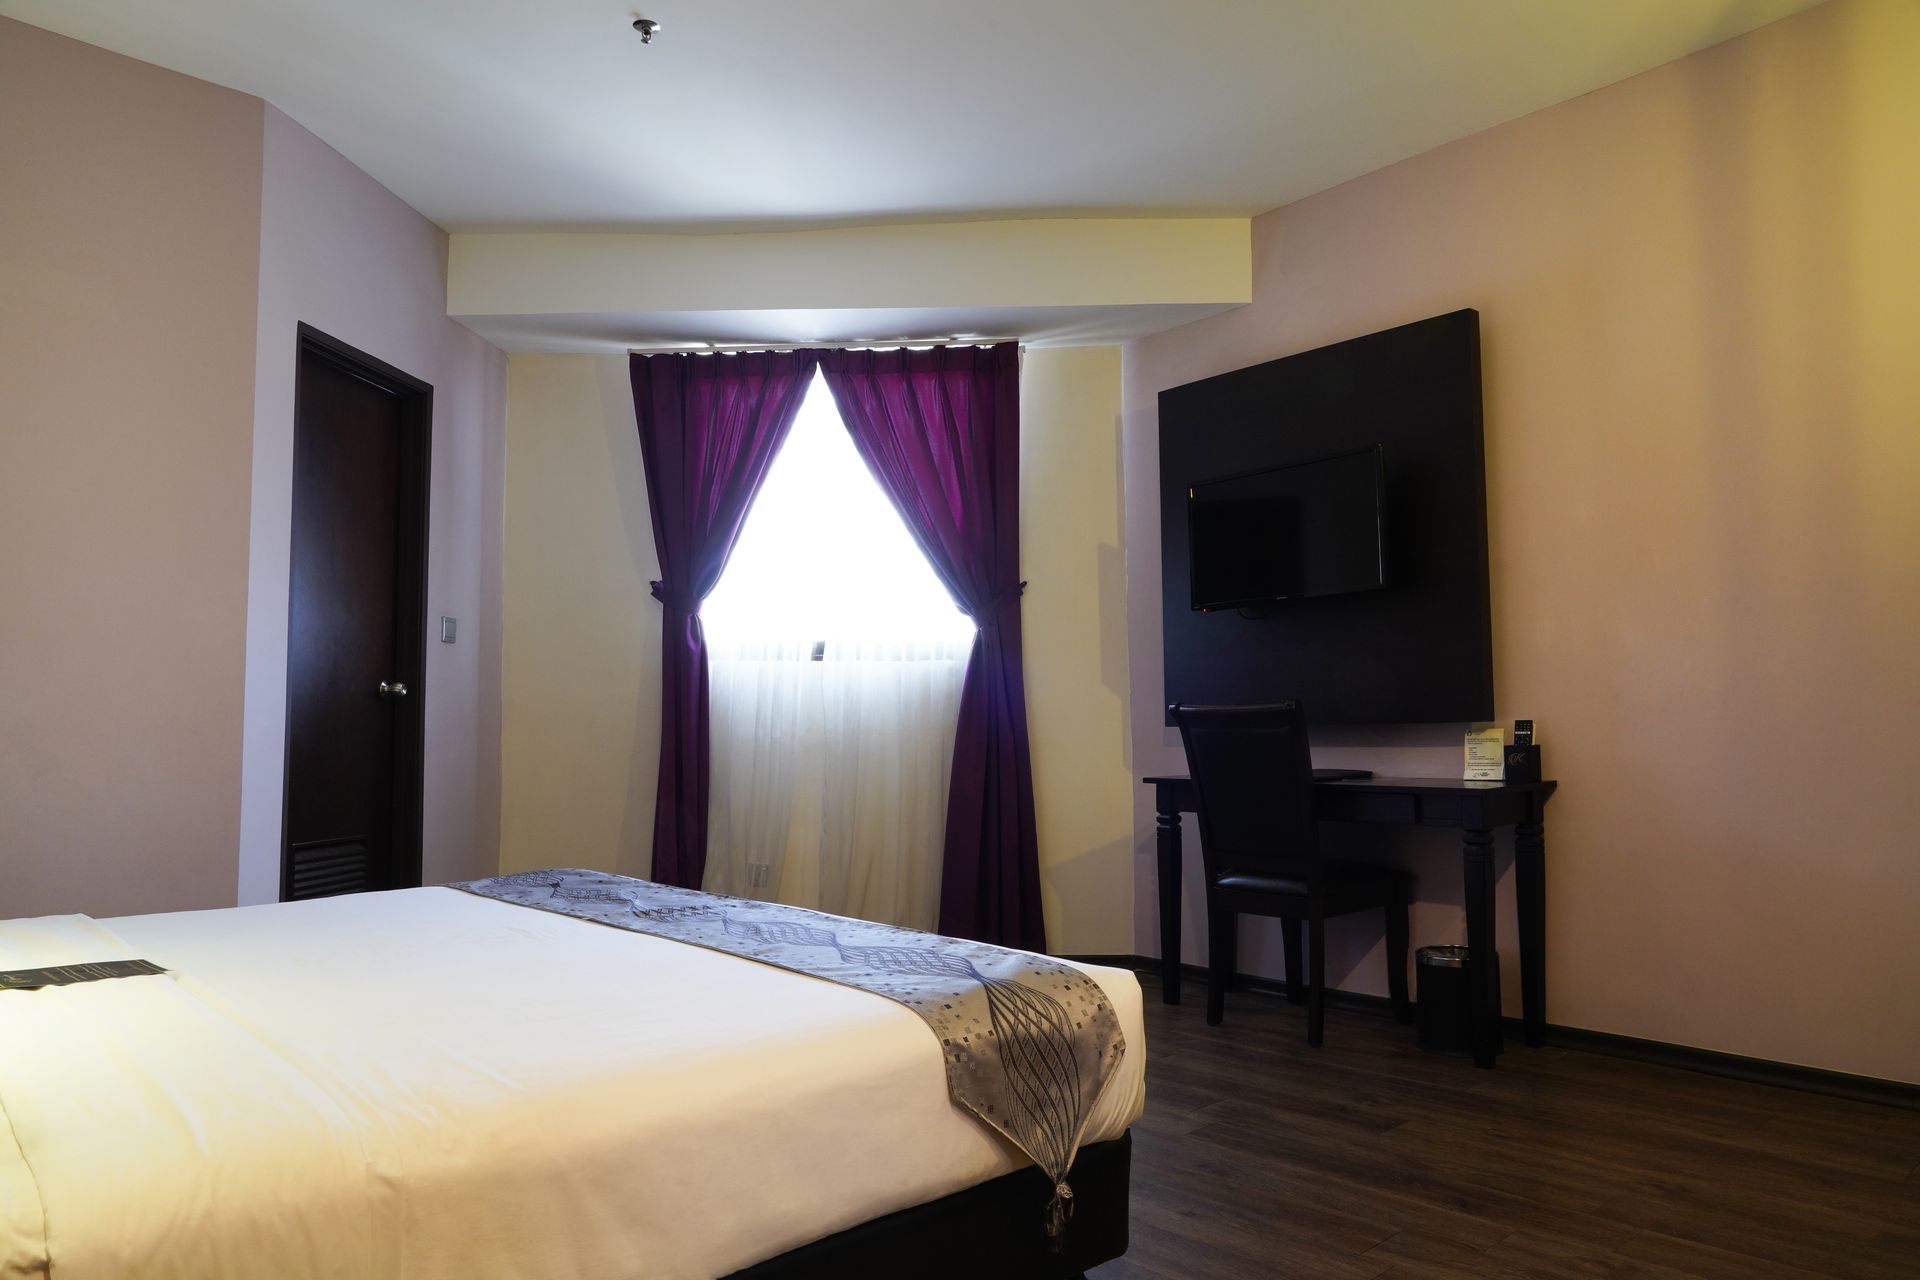 A hotel room with a large bed and purple curtains